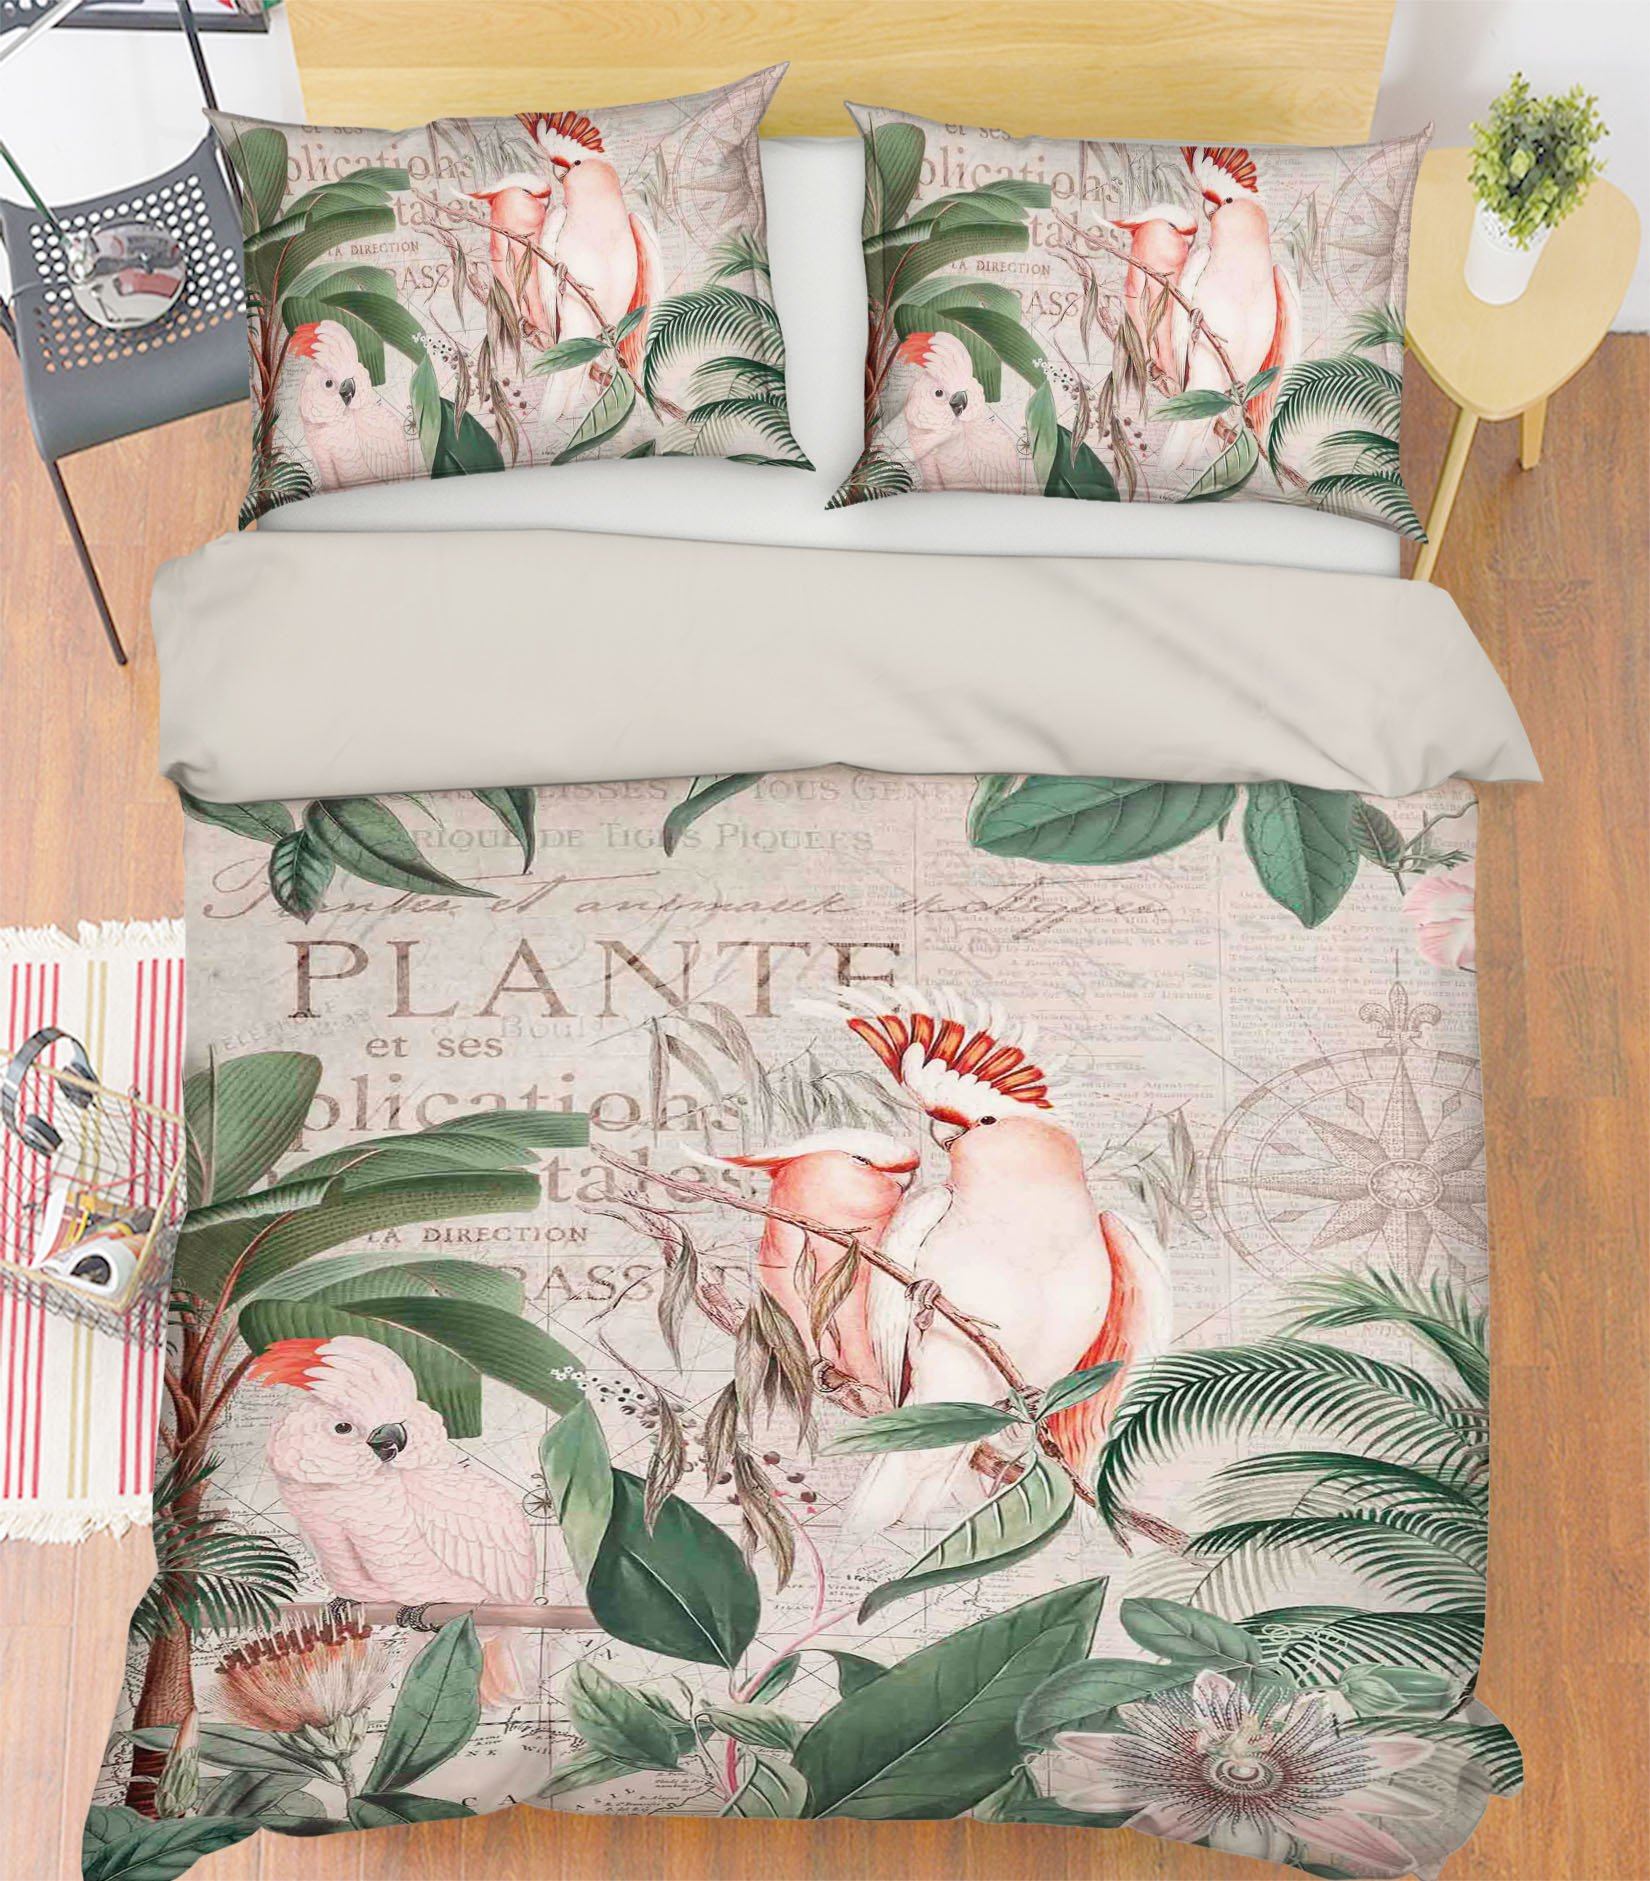 3D Branch Parrot 2141 Andrea haase Bedding Bed Pillowcases Quilt Quiet Covers AJ Creativity Home 